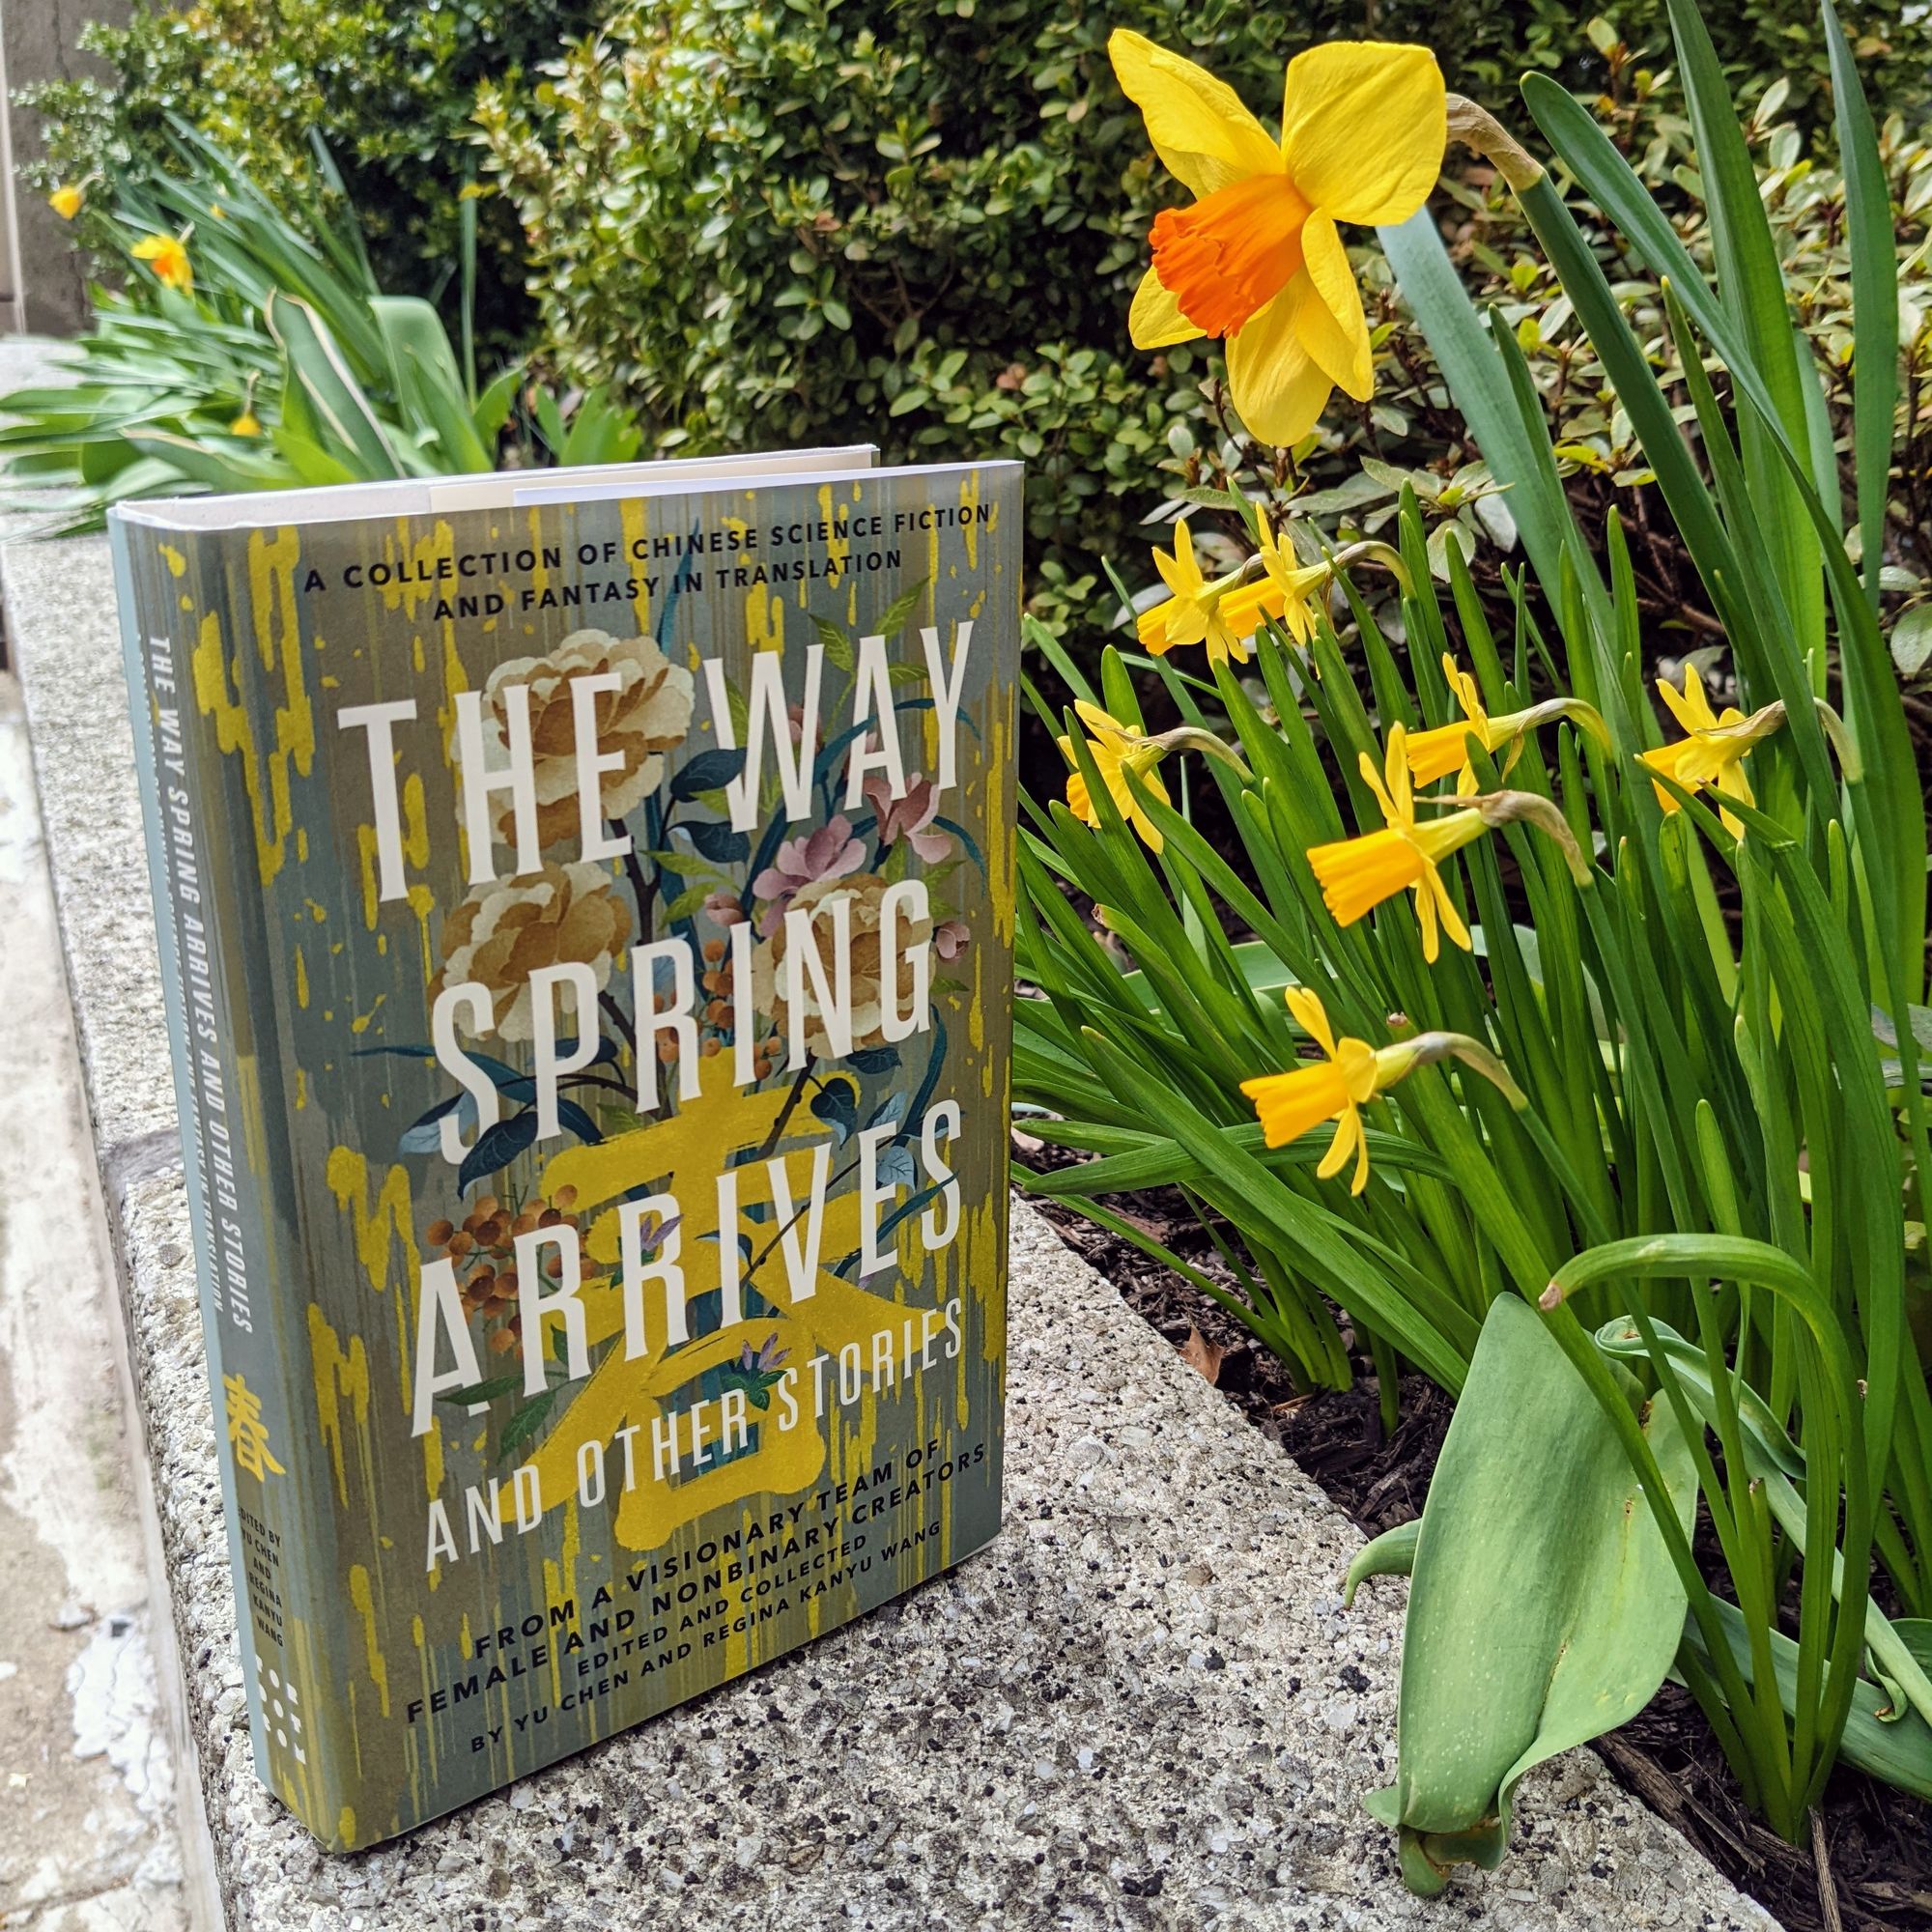 a hardcover copy of THE WAY SPRING ARRIVES AND OTHER STORIES positioned next to a planter full of daffodils, positioned in such a way that it looks like the flowers are reading the front cover 